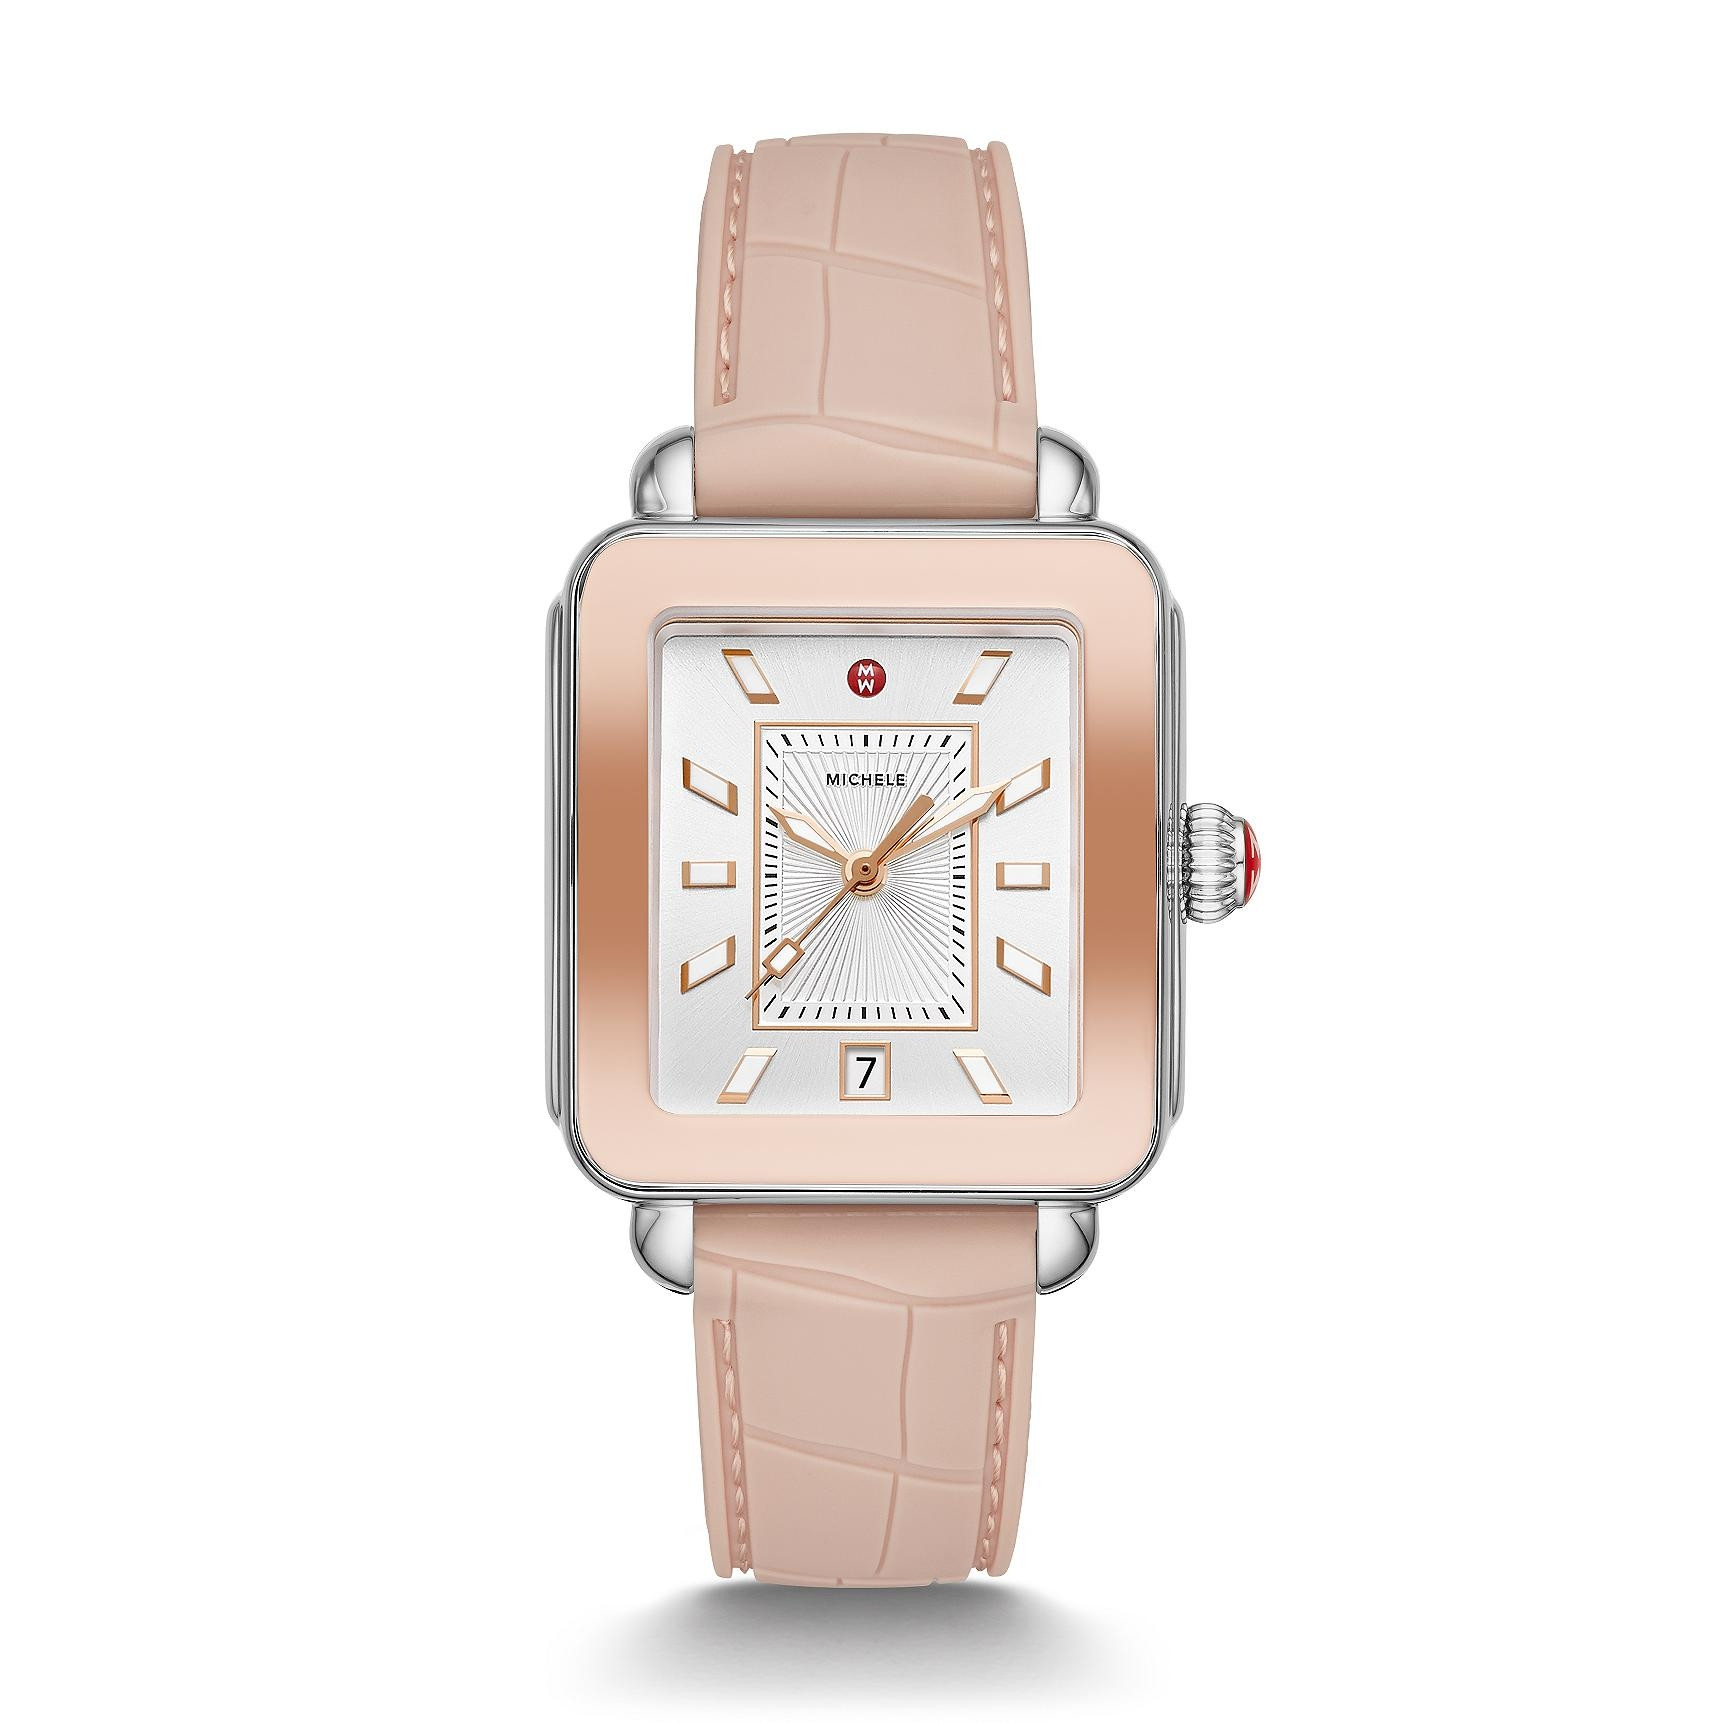 Michele Deco Sport Pink Gold Watch with Silver